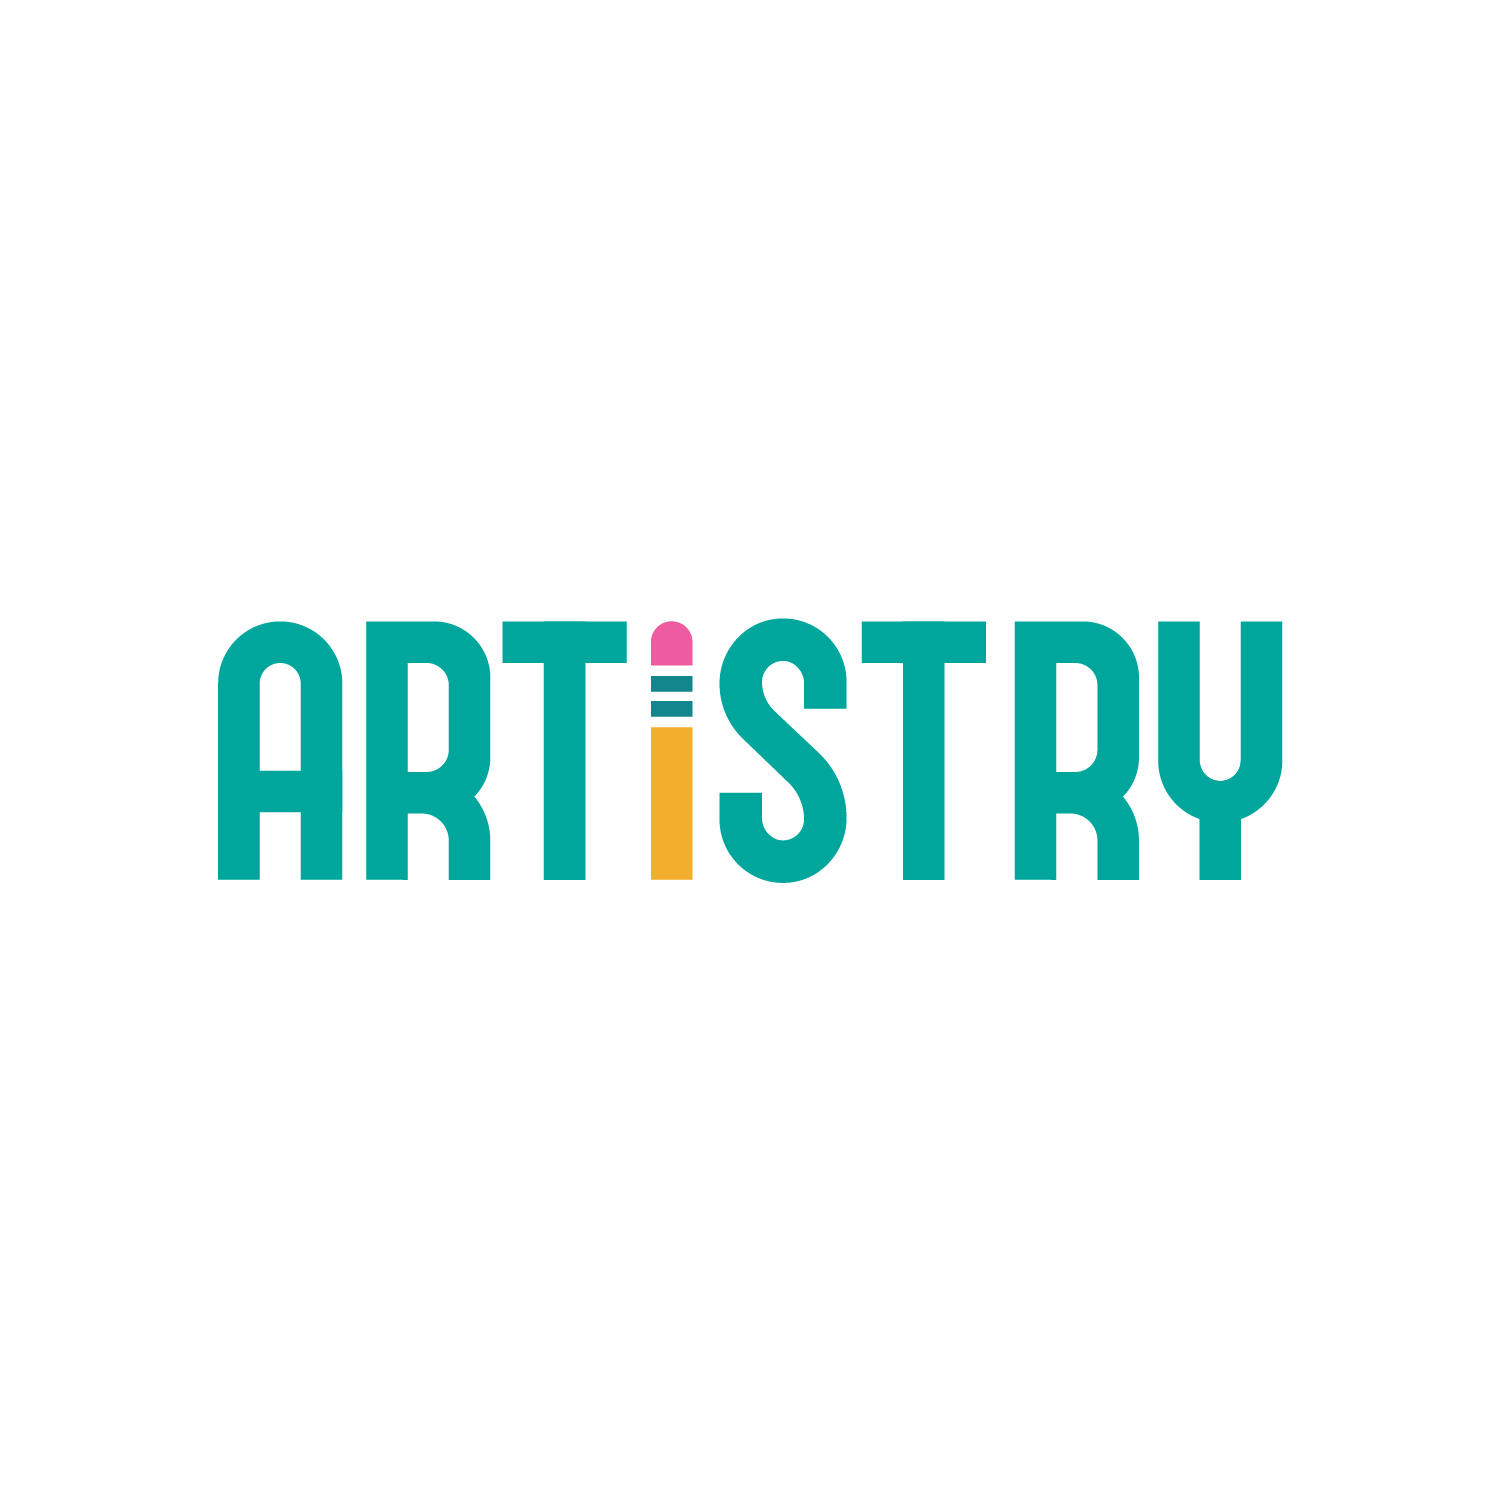 Artistry Creative Career Fair logo design by logo designer PAX STUDIO for your inspiration and for the worlds largest logo competition